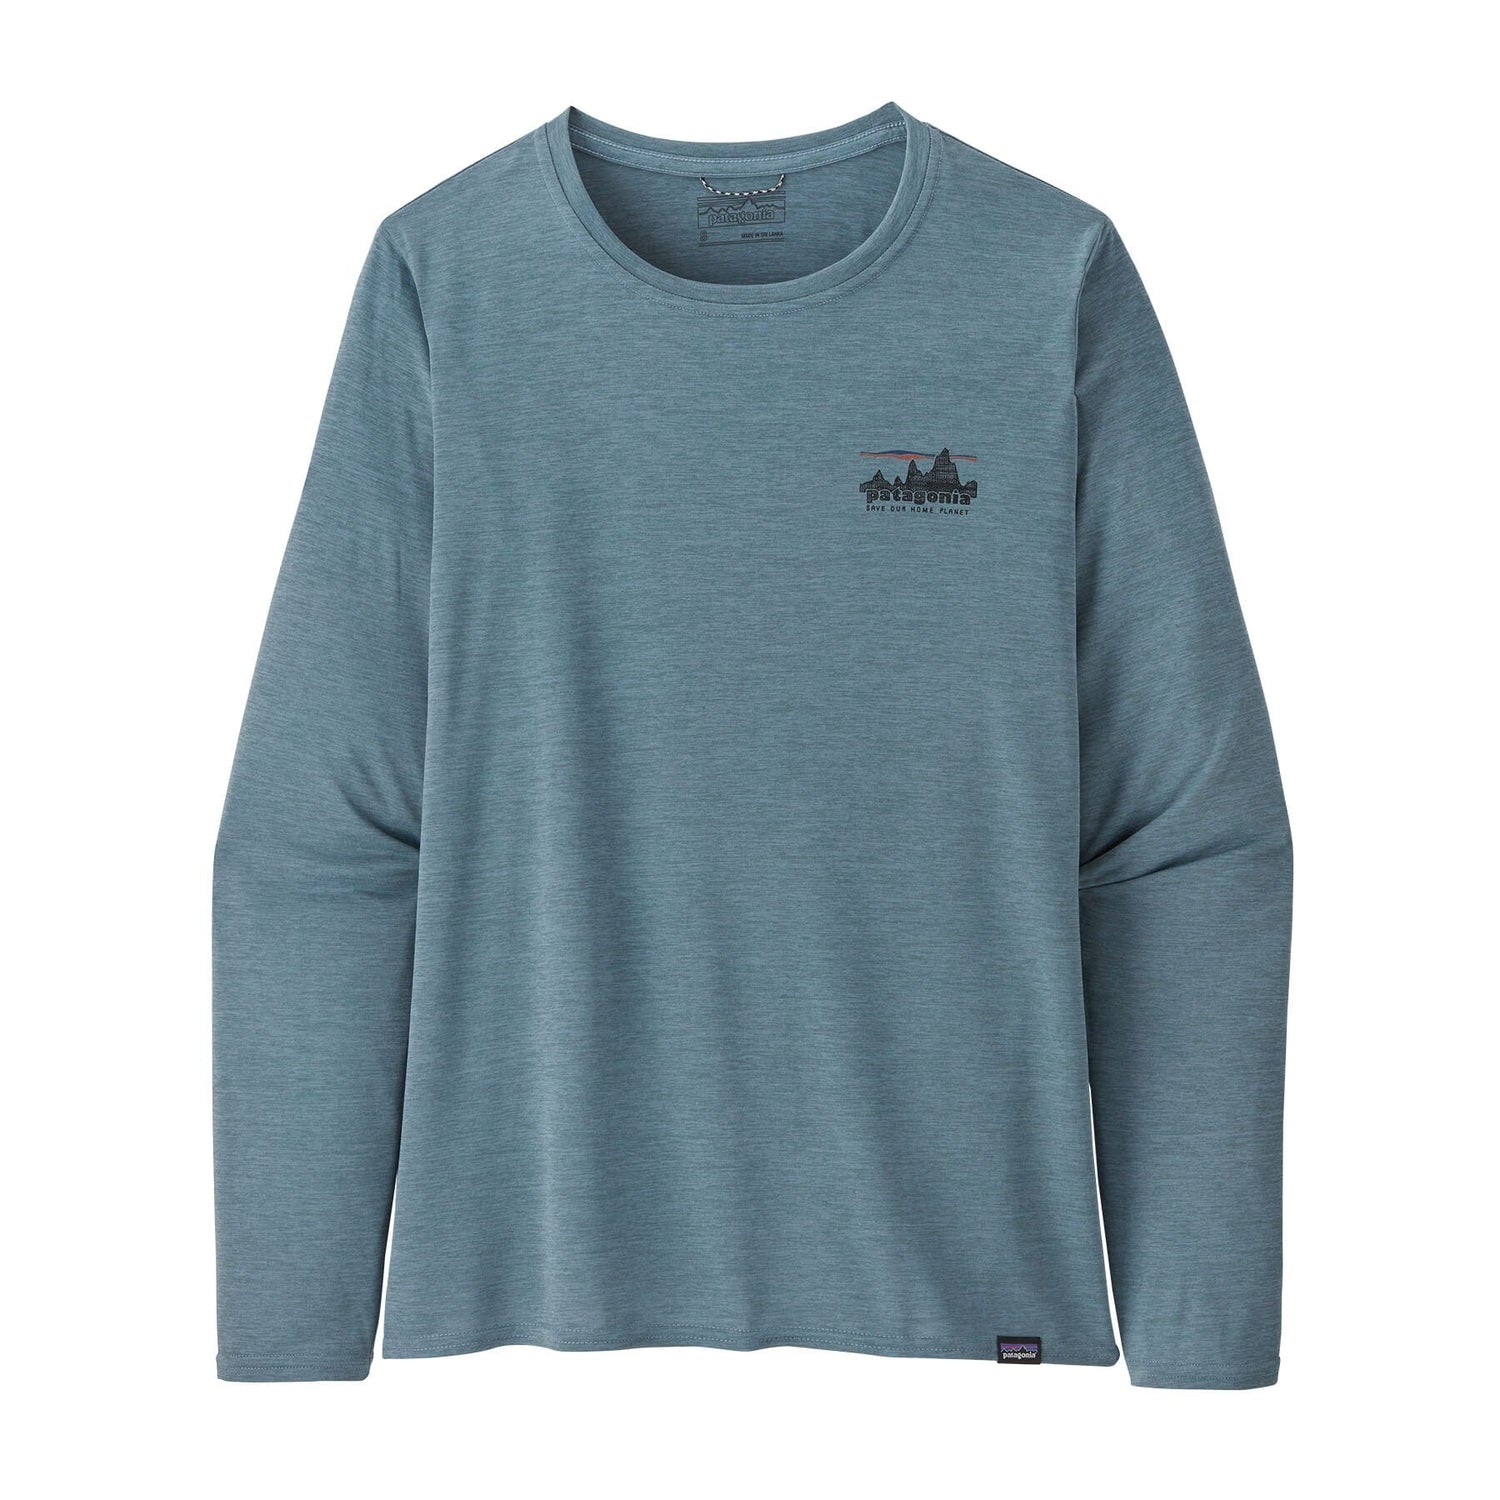 Patagonia W's Long-Sleeved Capilene® Cool Daily Graphic Shirt - Recycled Polyester '73 Skyline: Light Plume Grey X-Dye Shirt